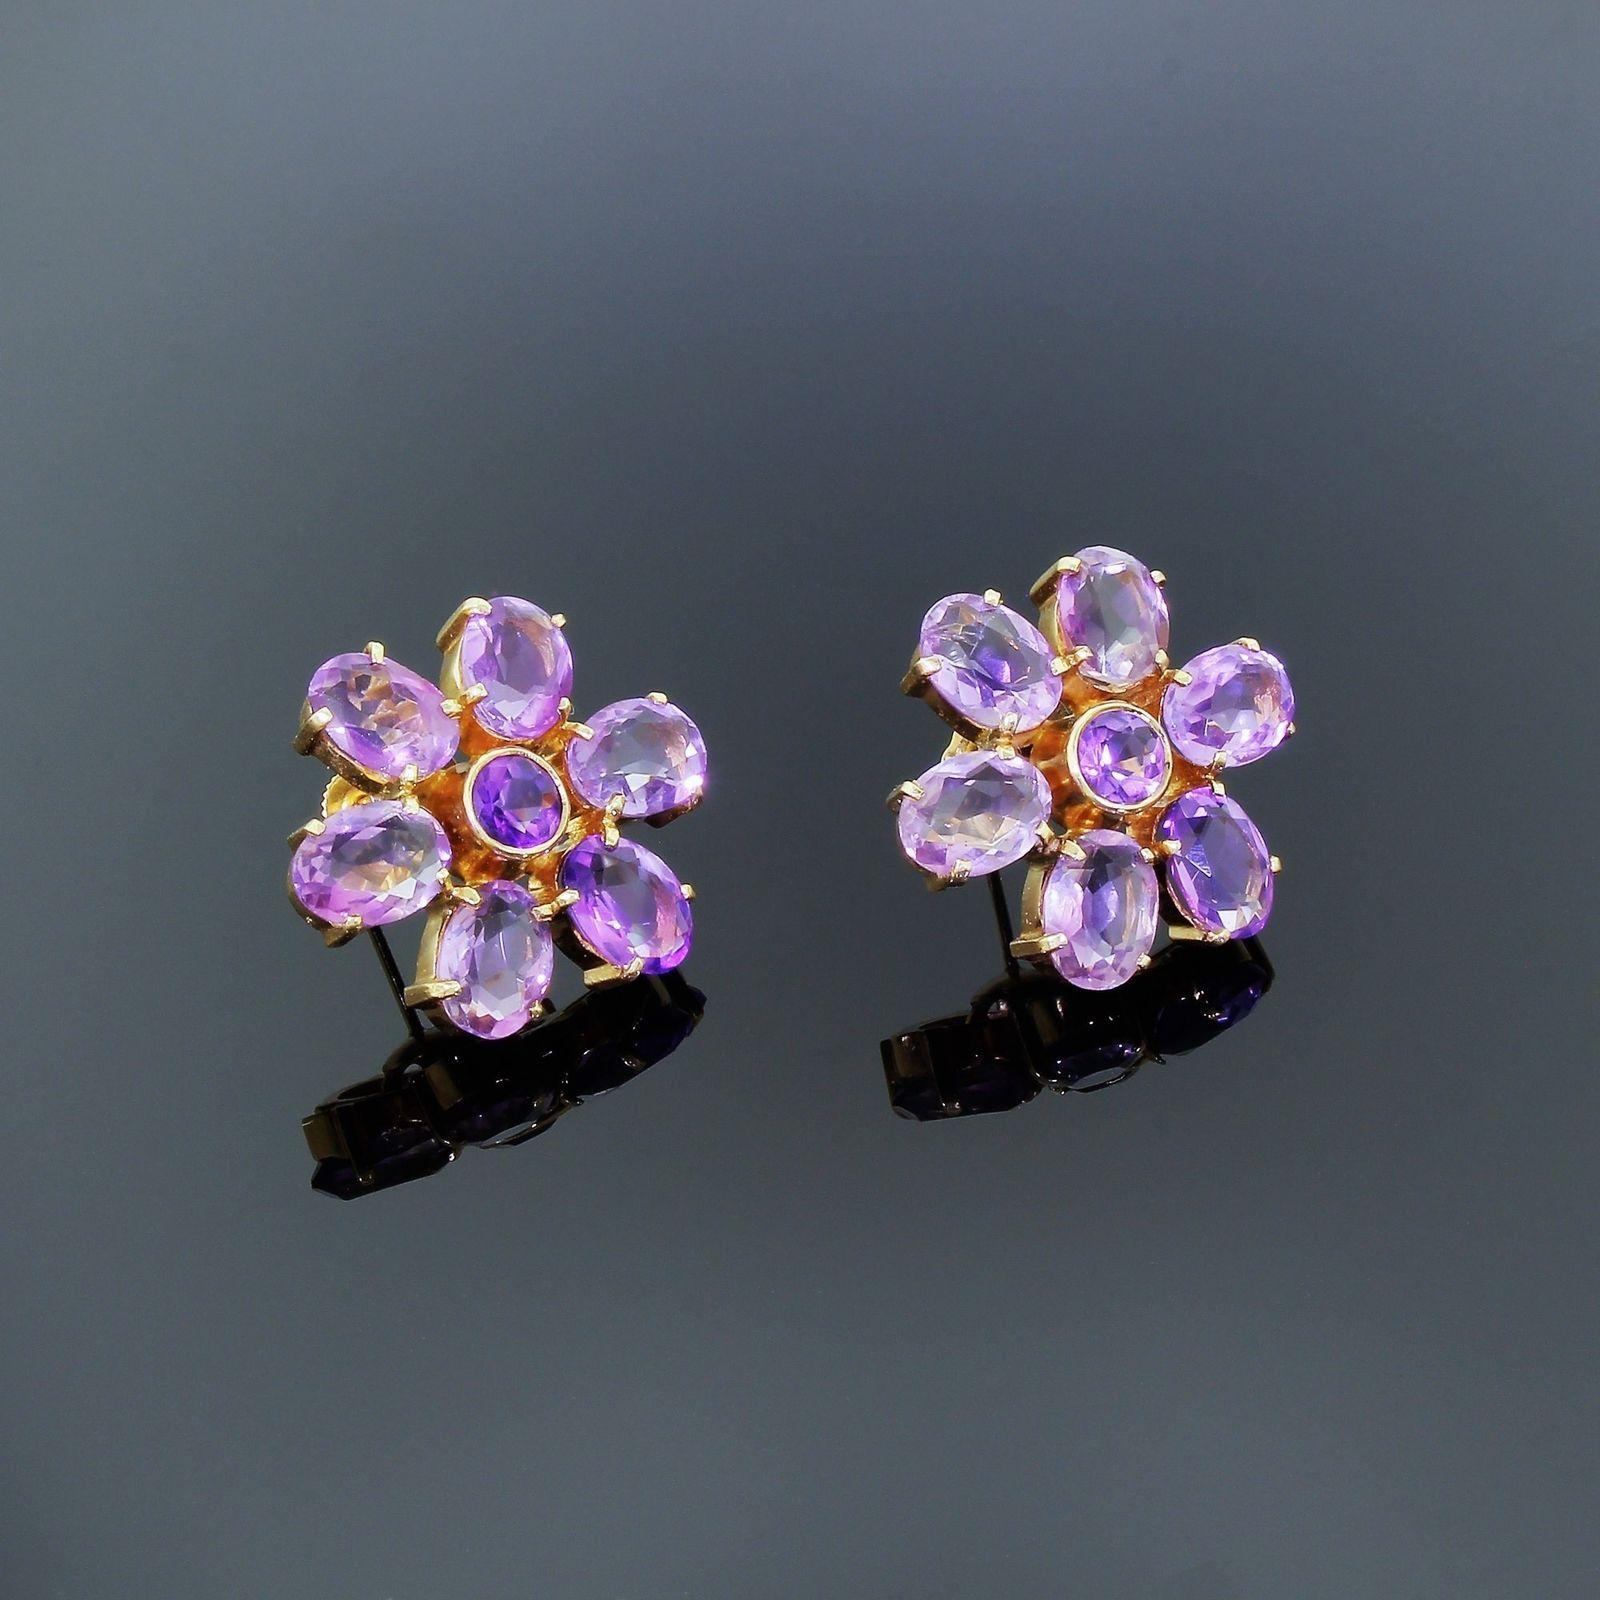 Vintage 14k Gold Amethyst Floral Flower Cluster Earrings 12 Carats 11.3 Grams In Excellent Condition For Sale In Lauderdale by the Sea, FL